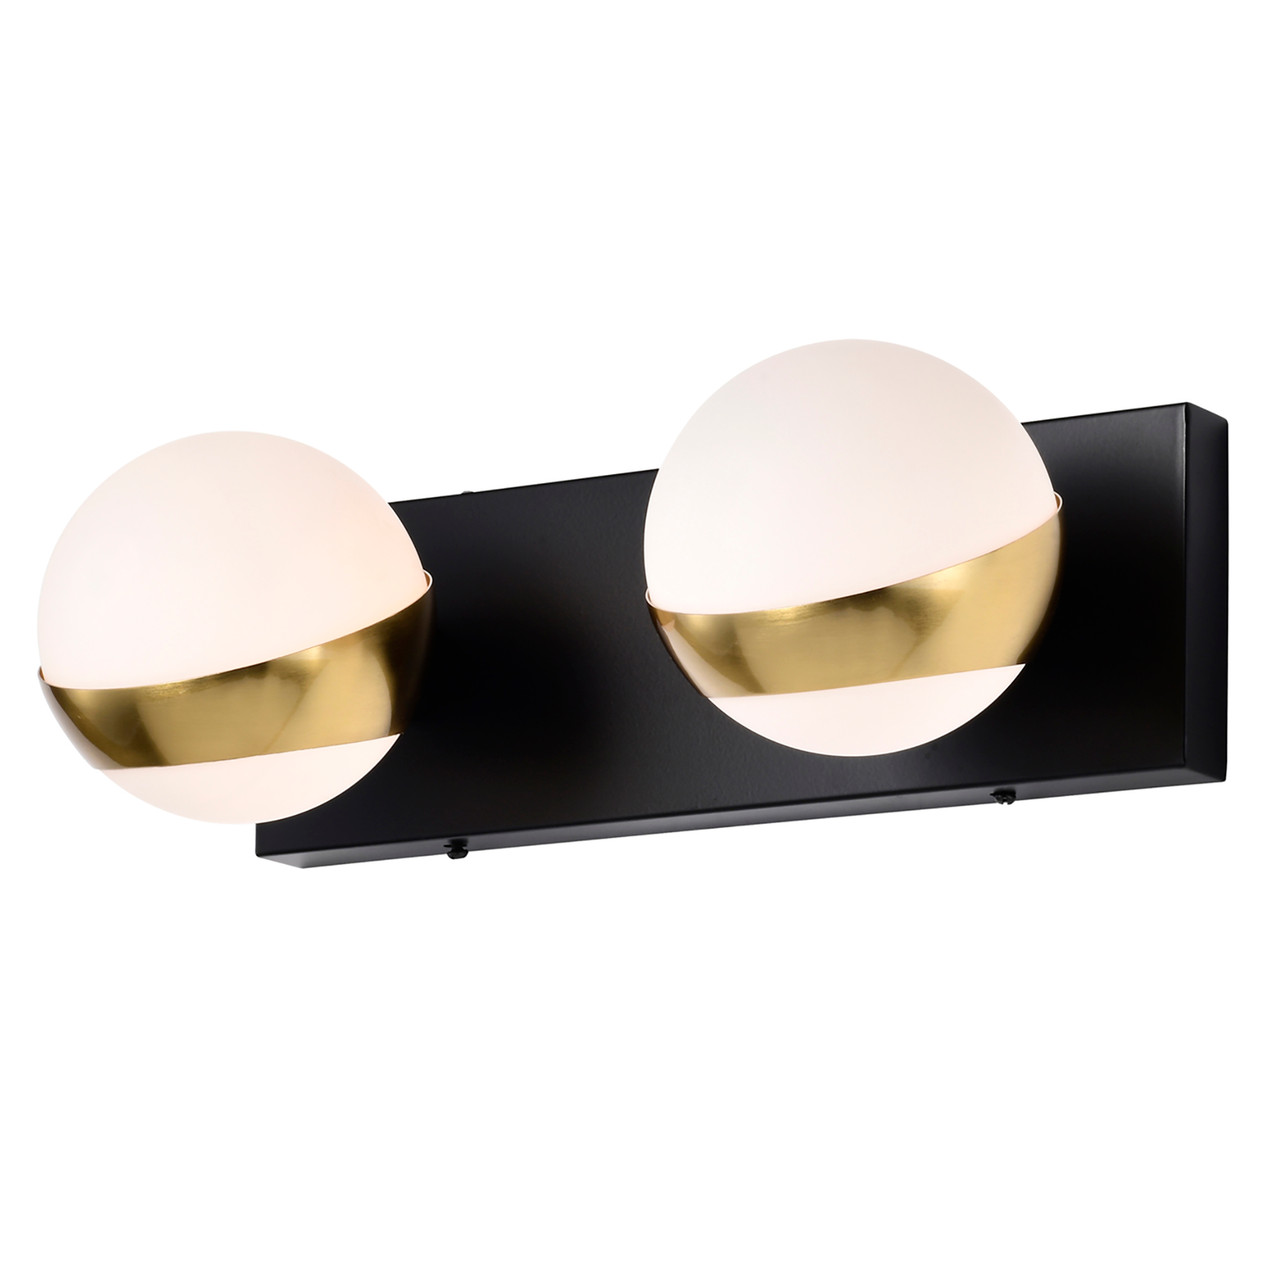 WAREHOUSE OF TIFFANY'S 3008/2WA Duo 14 in. 2-Light Indoor Matte Black and Matte Gold Finish Wall Sconce with Light Kit